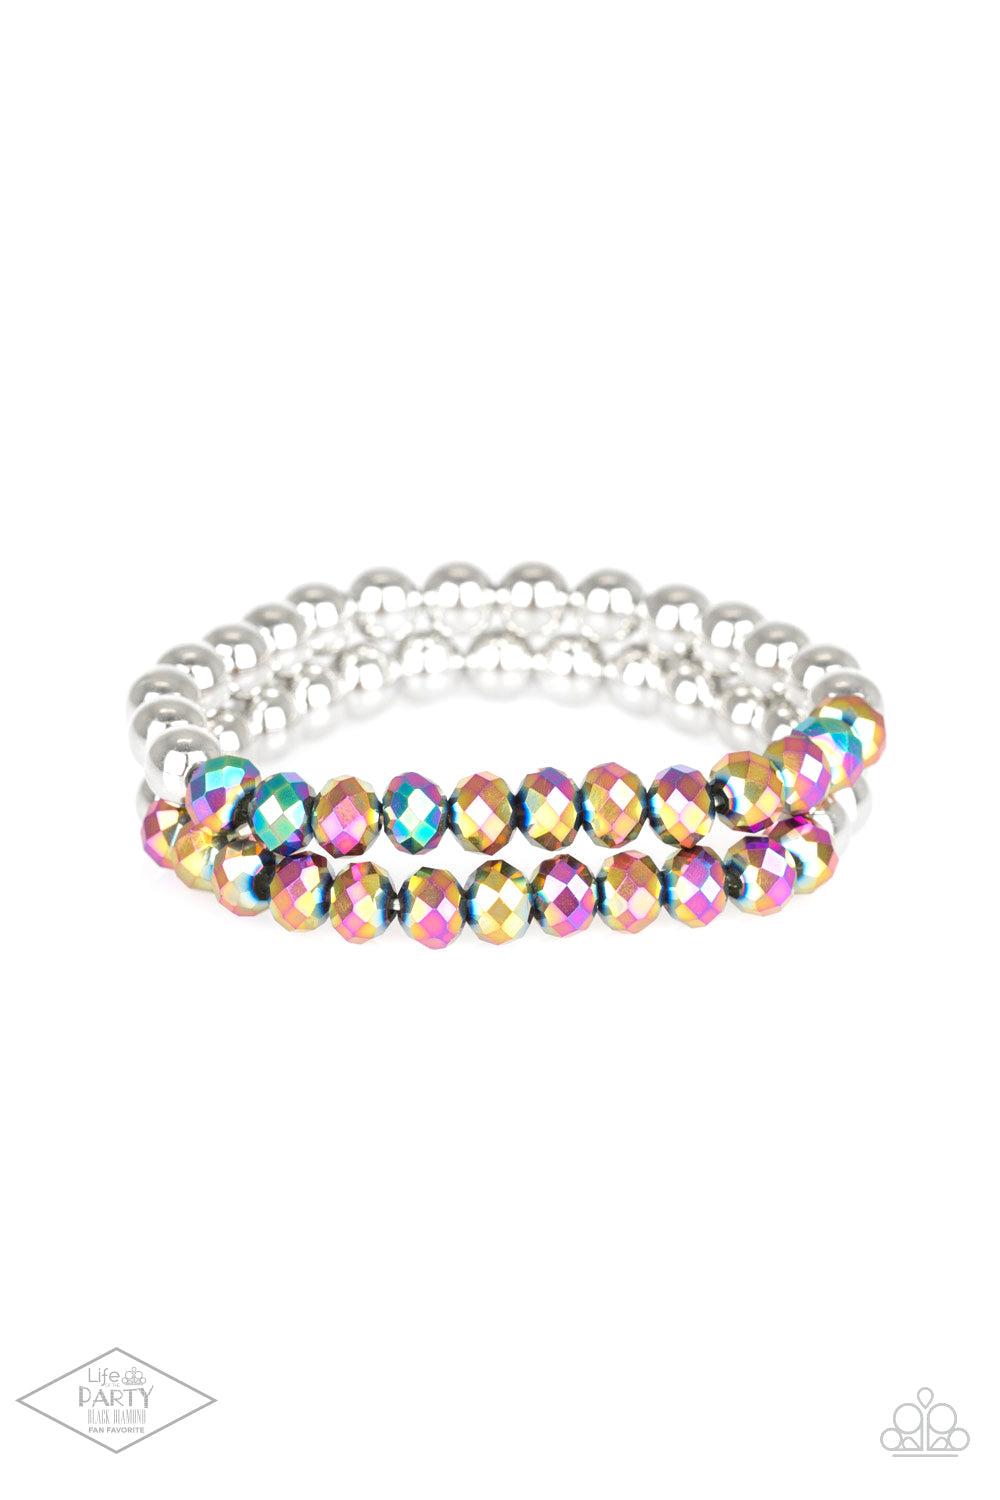 Chroma Color - Multi - Rainbow Iridescent - Silver Stretchy Bracelet - Paparazzi Accessories - Dipped in a rainbow iridescence, a collection of metallic crystal-like beads and shiny silver beads are threaded along two stretchy bands around the wrist for a stellar look.